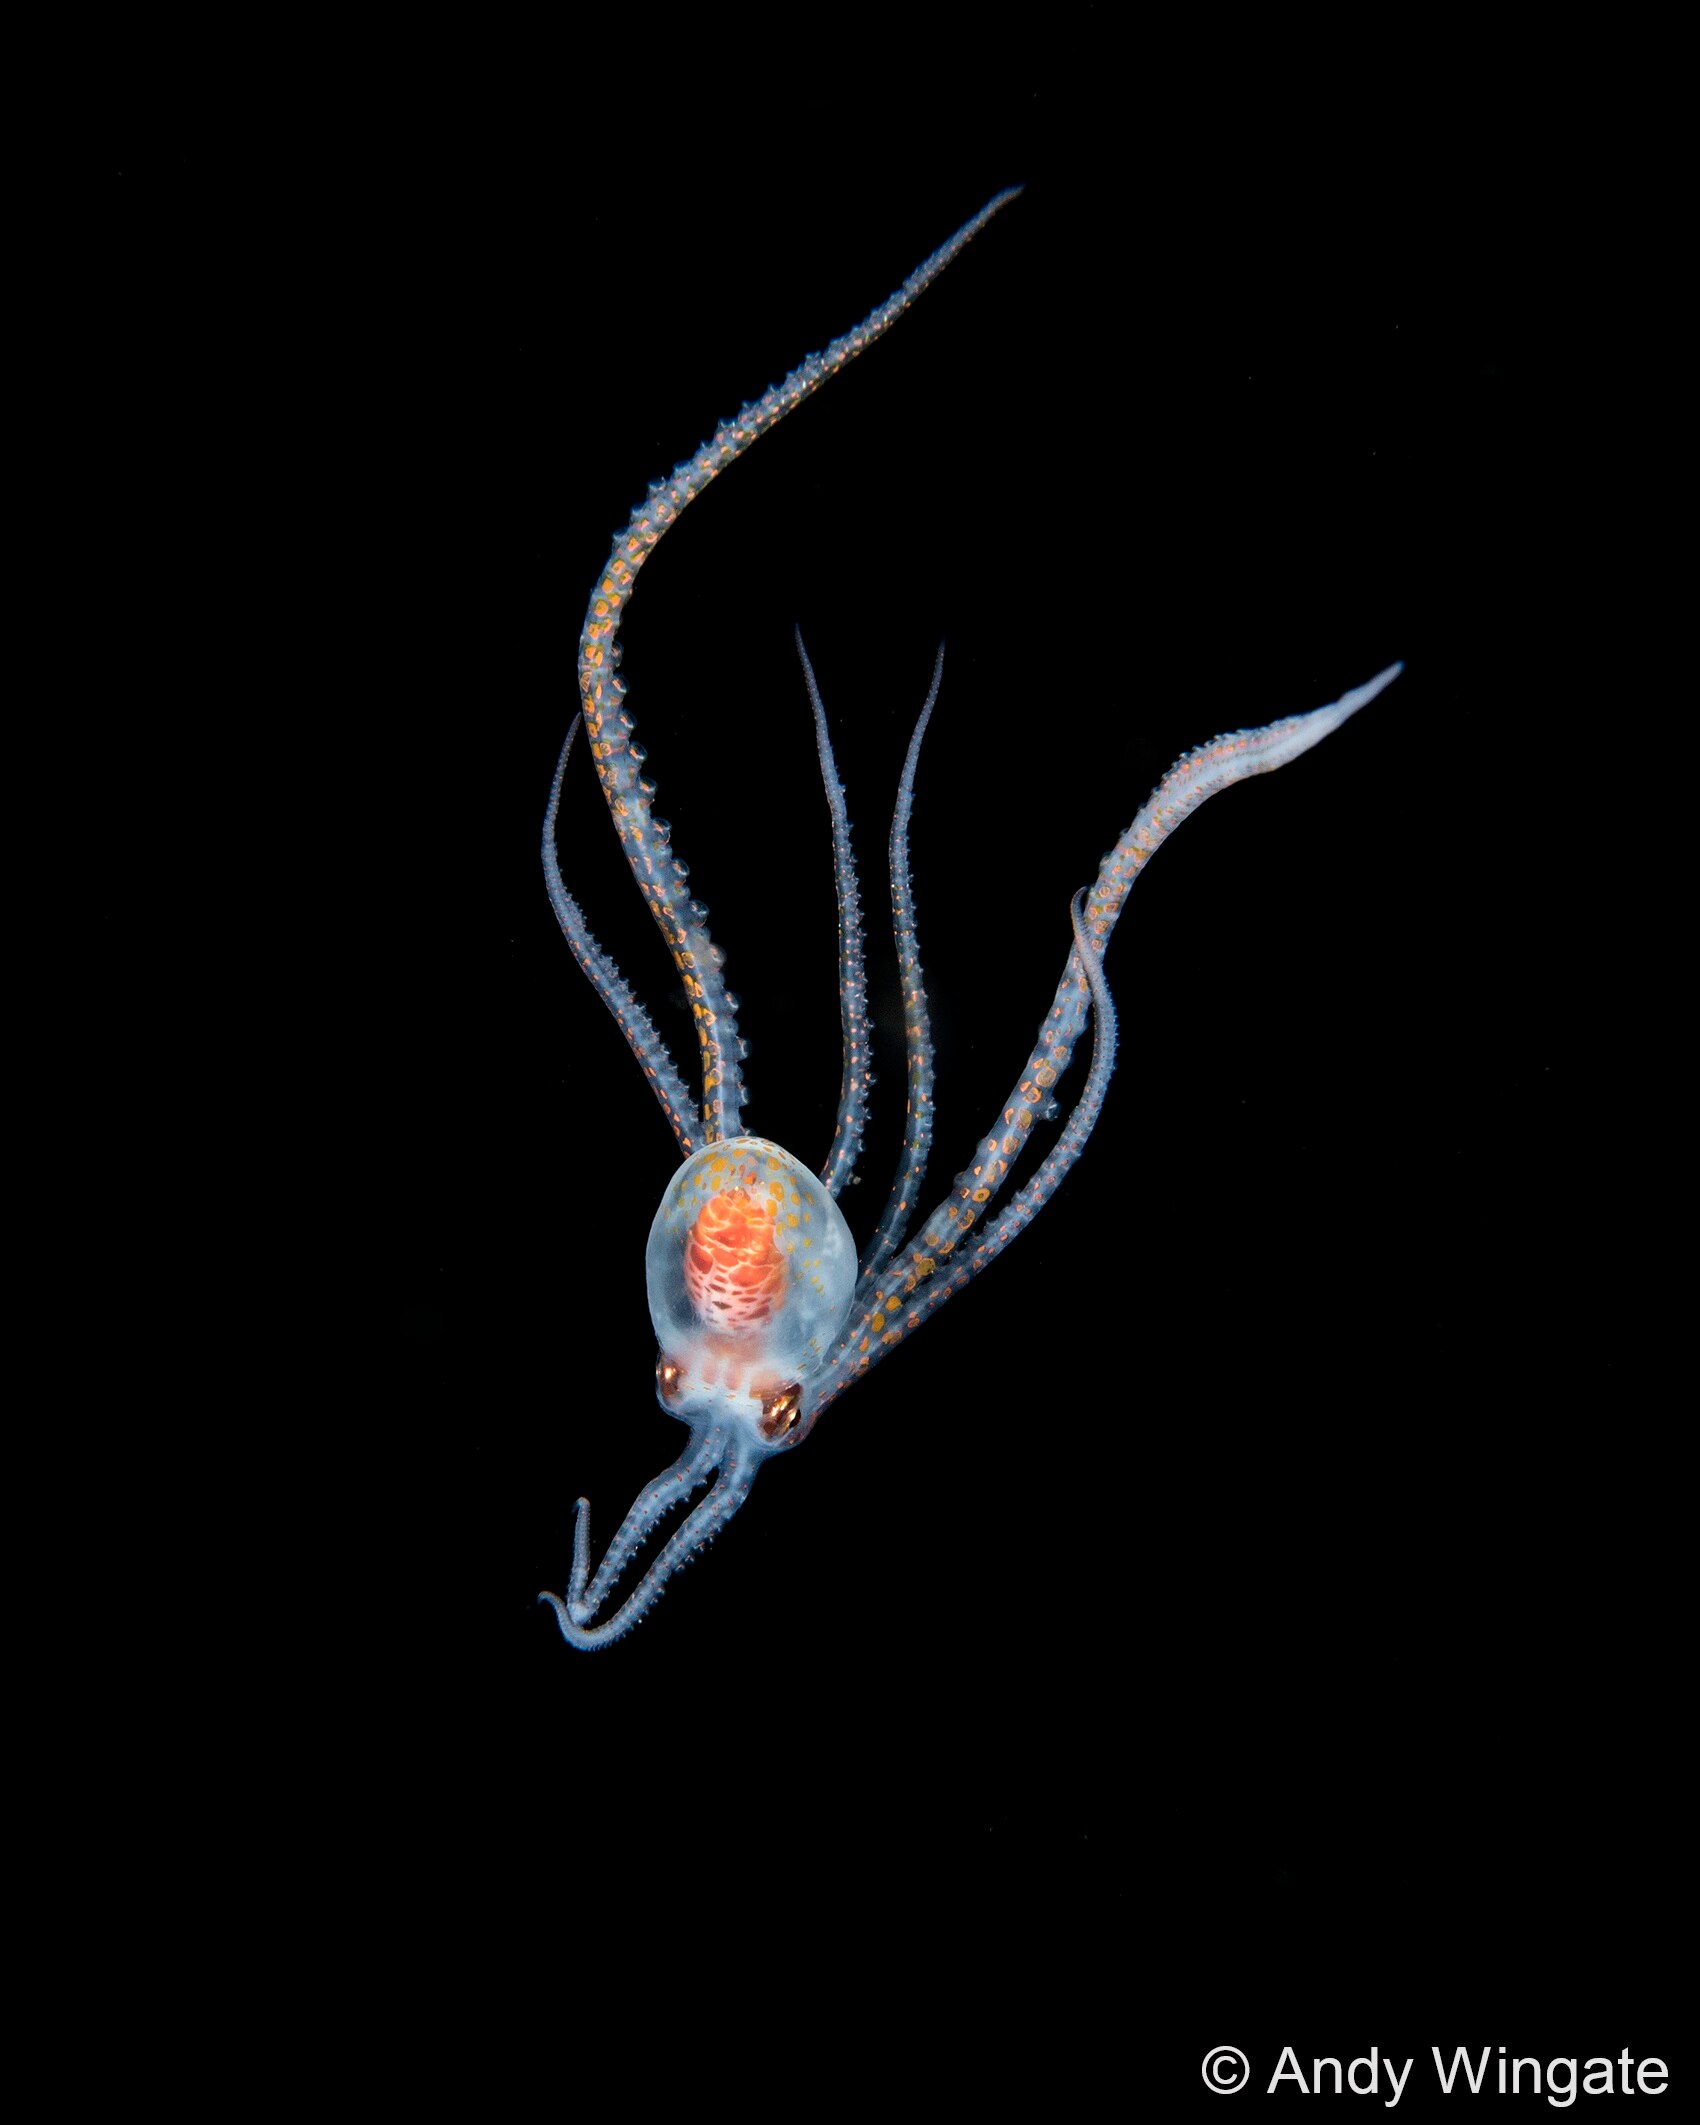 A close up of a translucent blue and orange long-armed octopus against a black background.